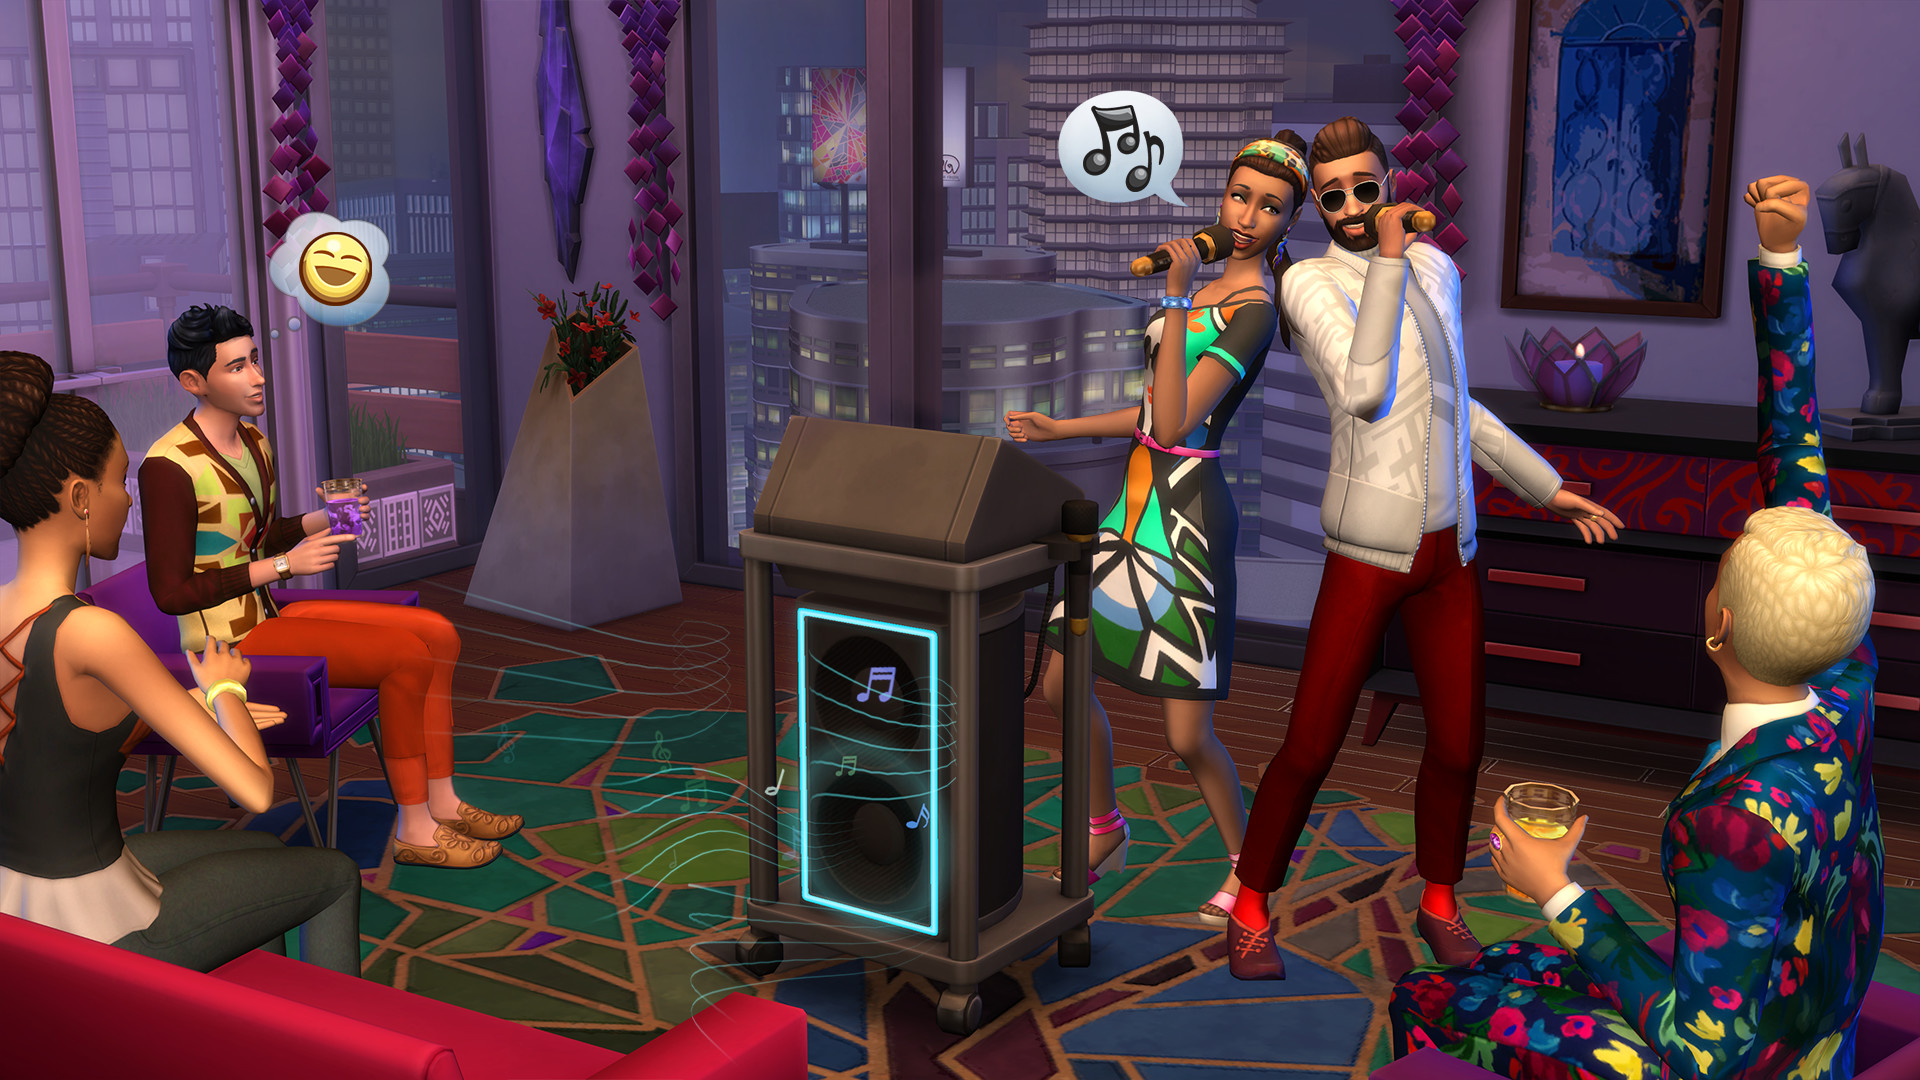 The Sims 4 Bundle Pack: City Living, Vampires, and Vintage Glamour DLCs Origin